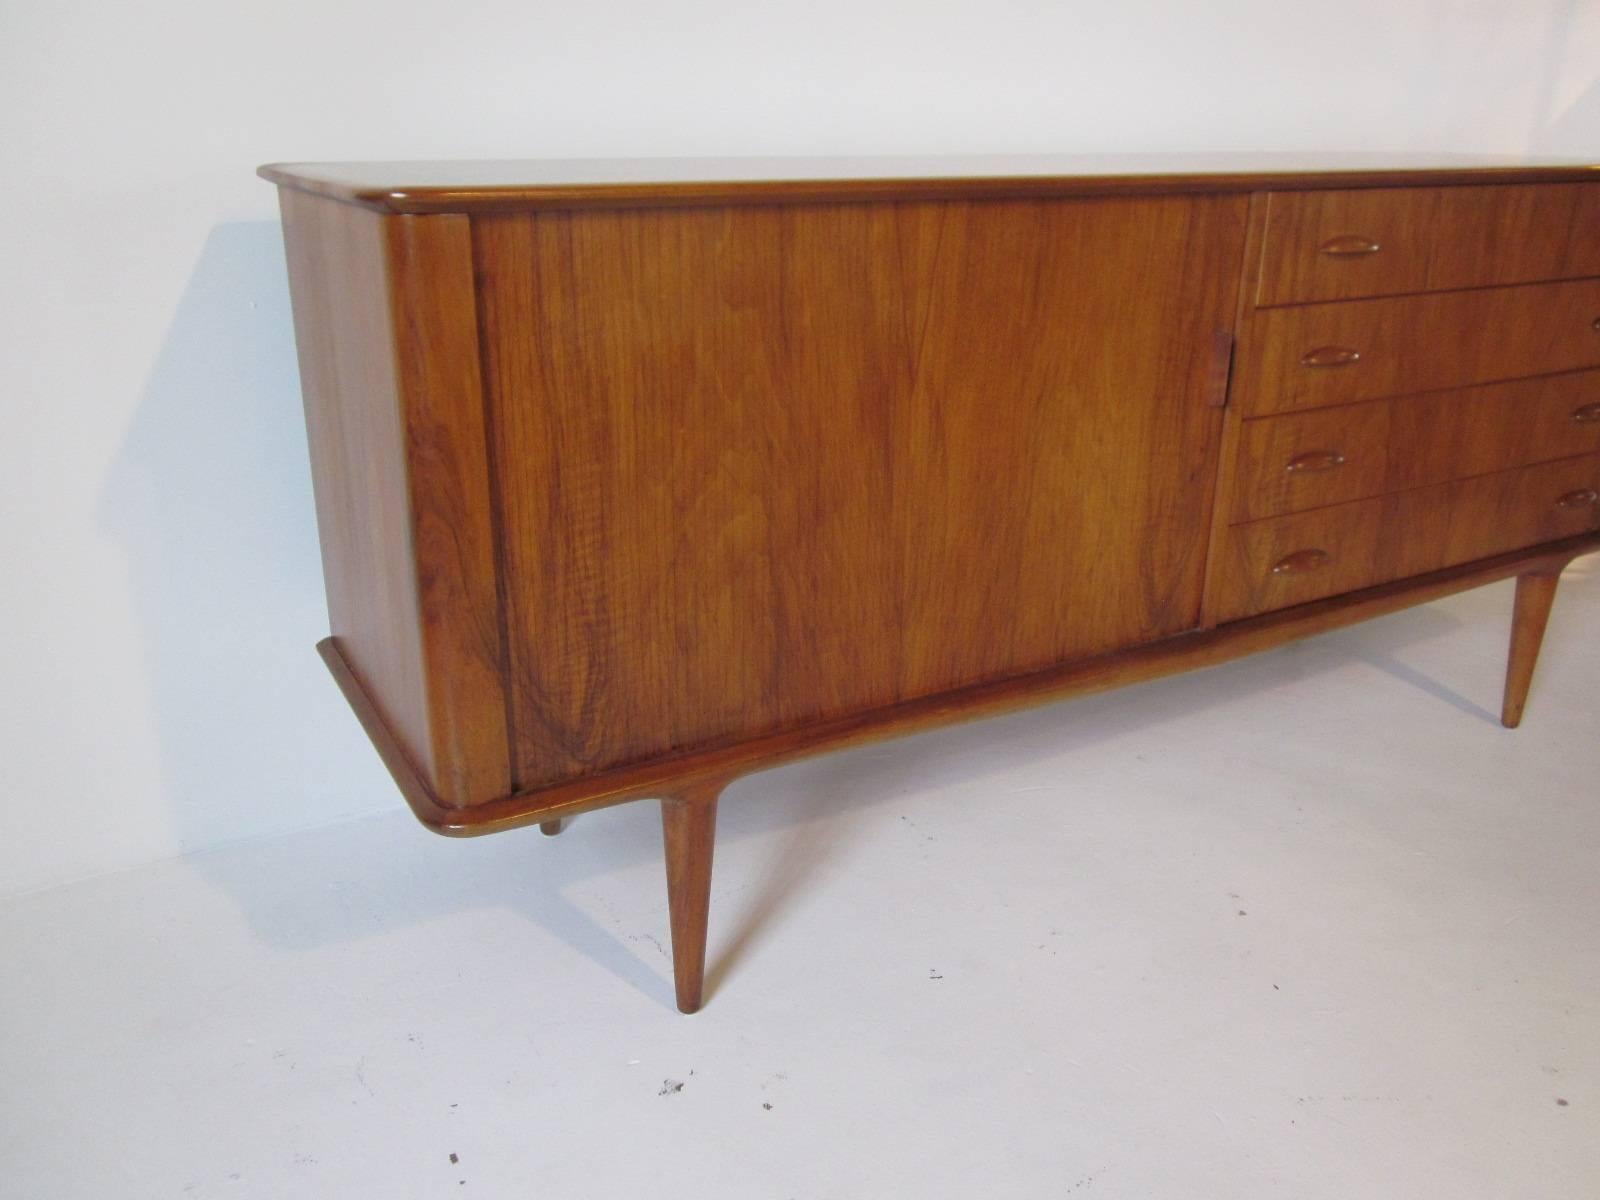 A well grained teakwood credenza or sever with sliding tambour door containing two shelves for storage and a bank of four drawers with wood pulls. Retains the manufactures branded mark M & M Moreddi. Made in Denmark.